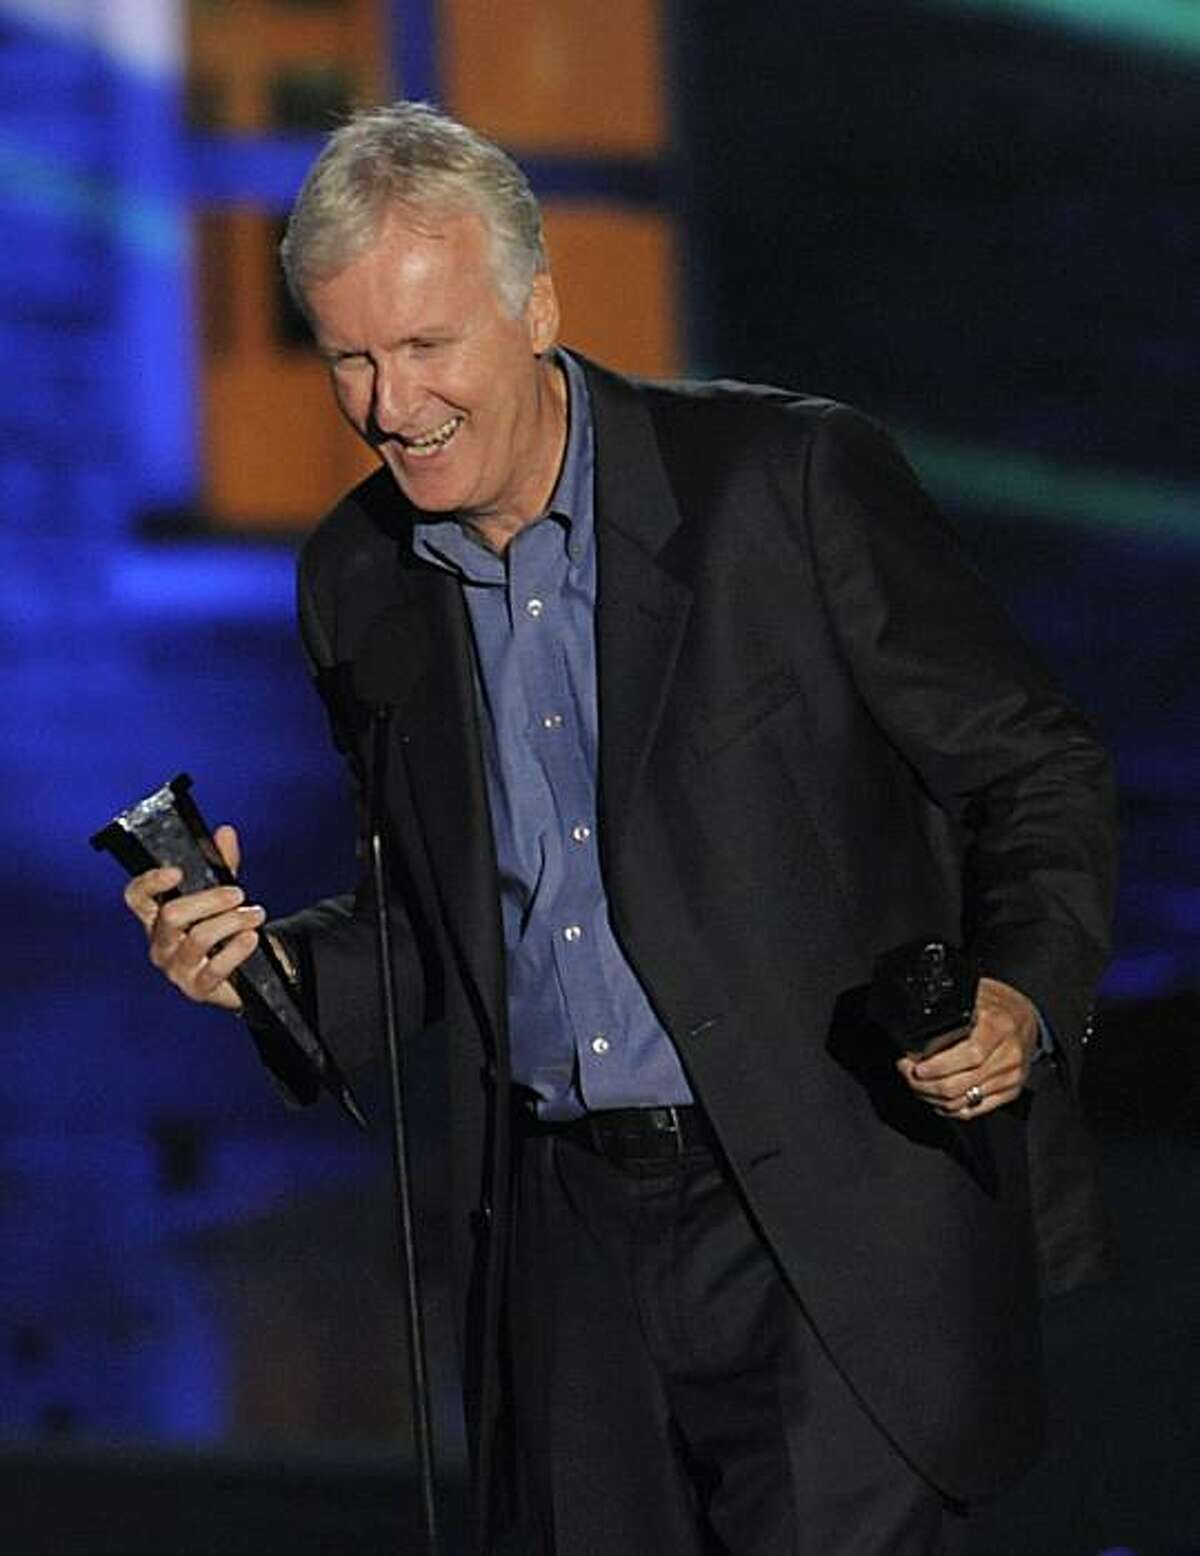 James Cameron accept the award for 3D Top 3 at the Scream Awards on Saturday Oct. 16, 2010, in Los Angeles.